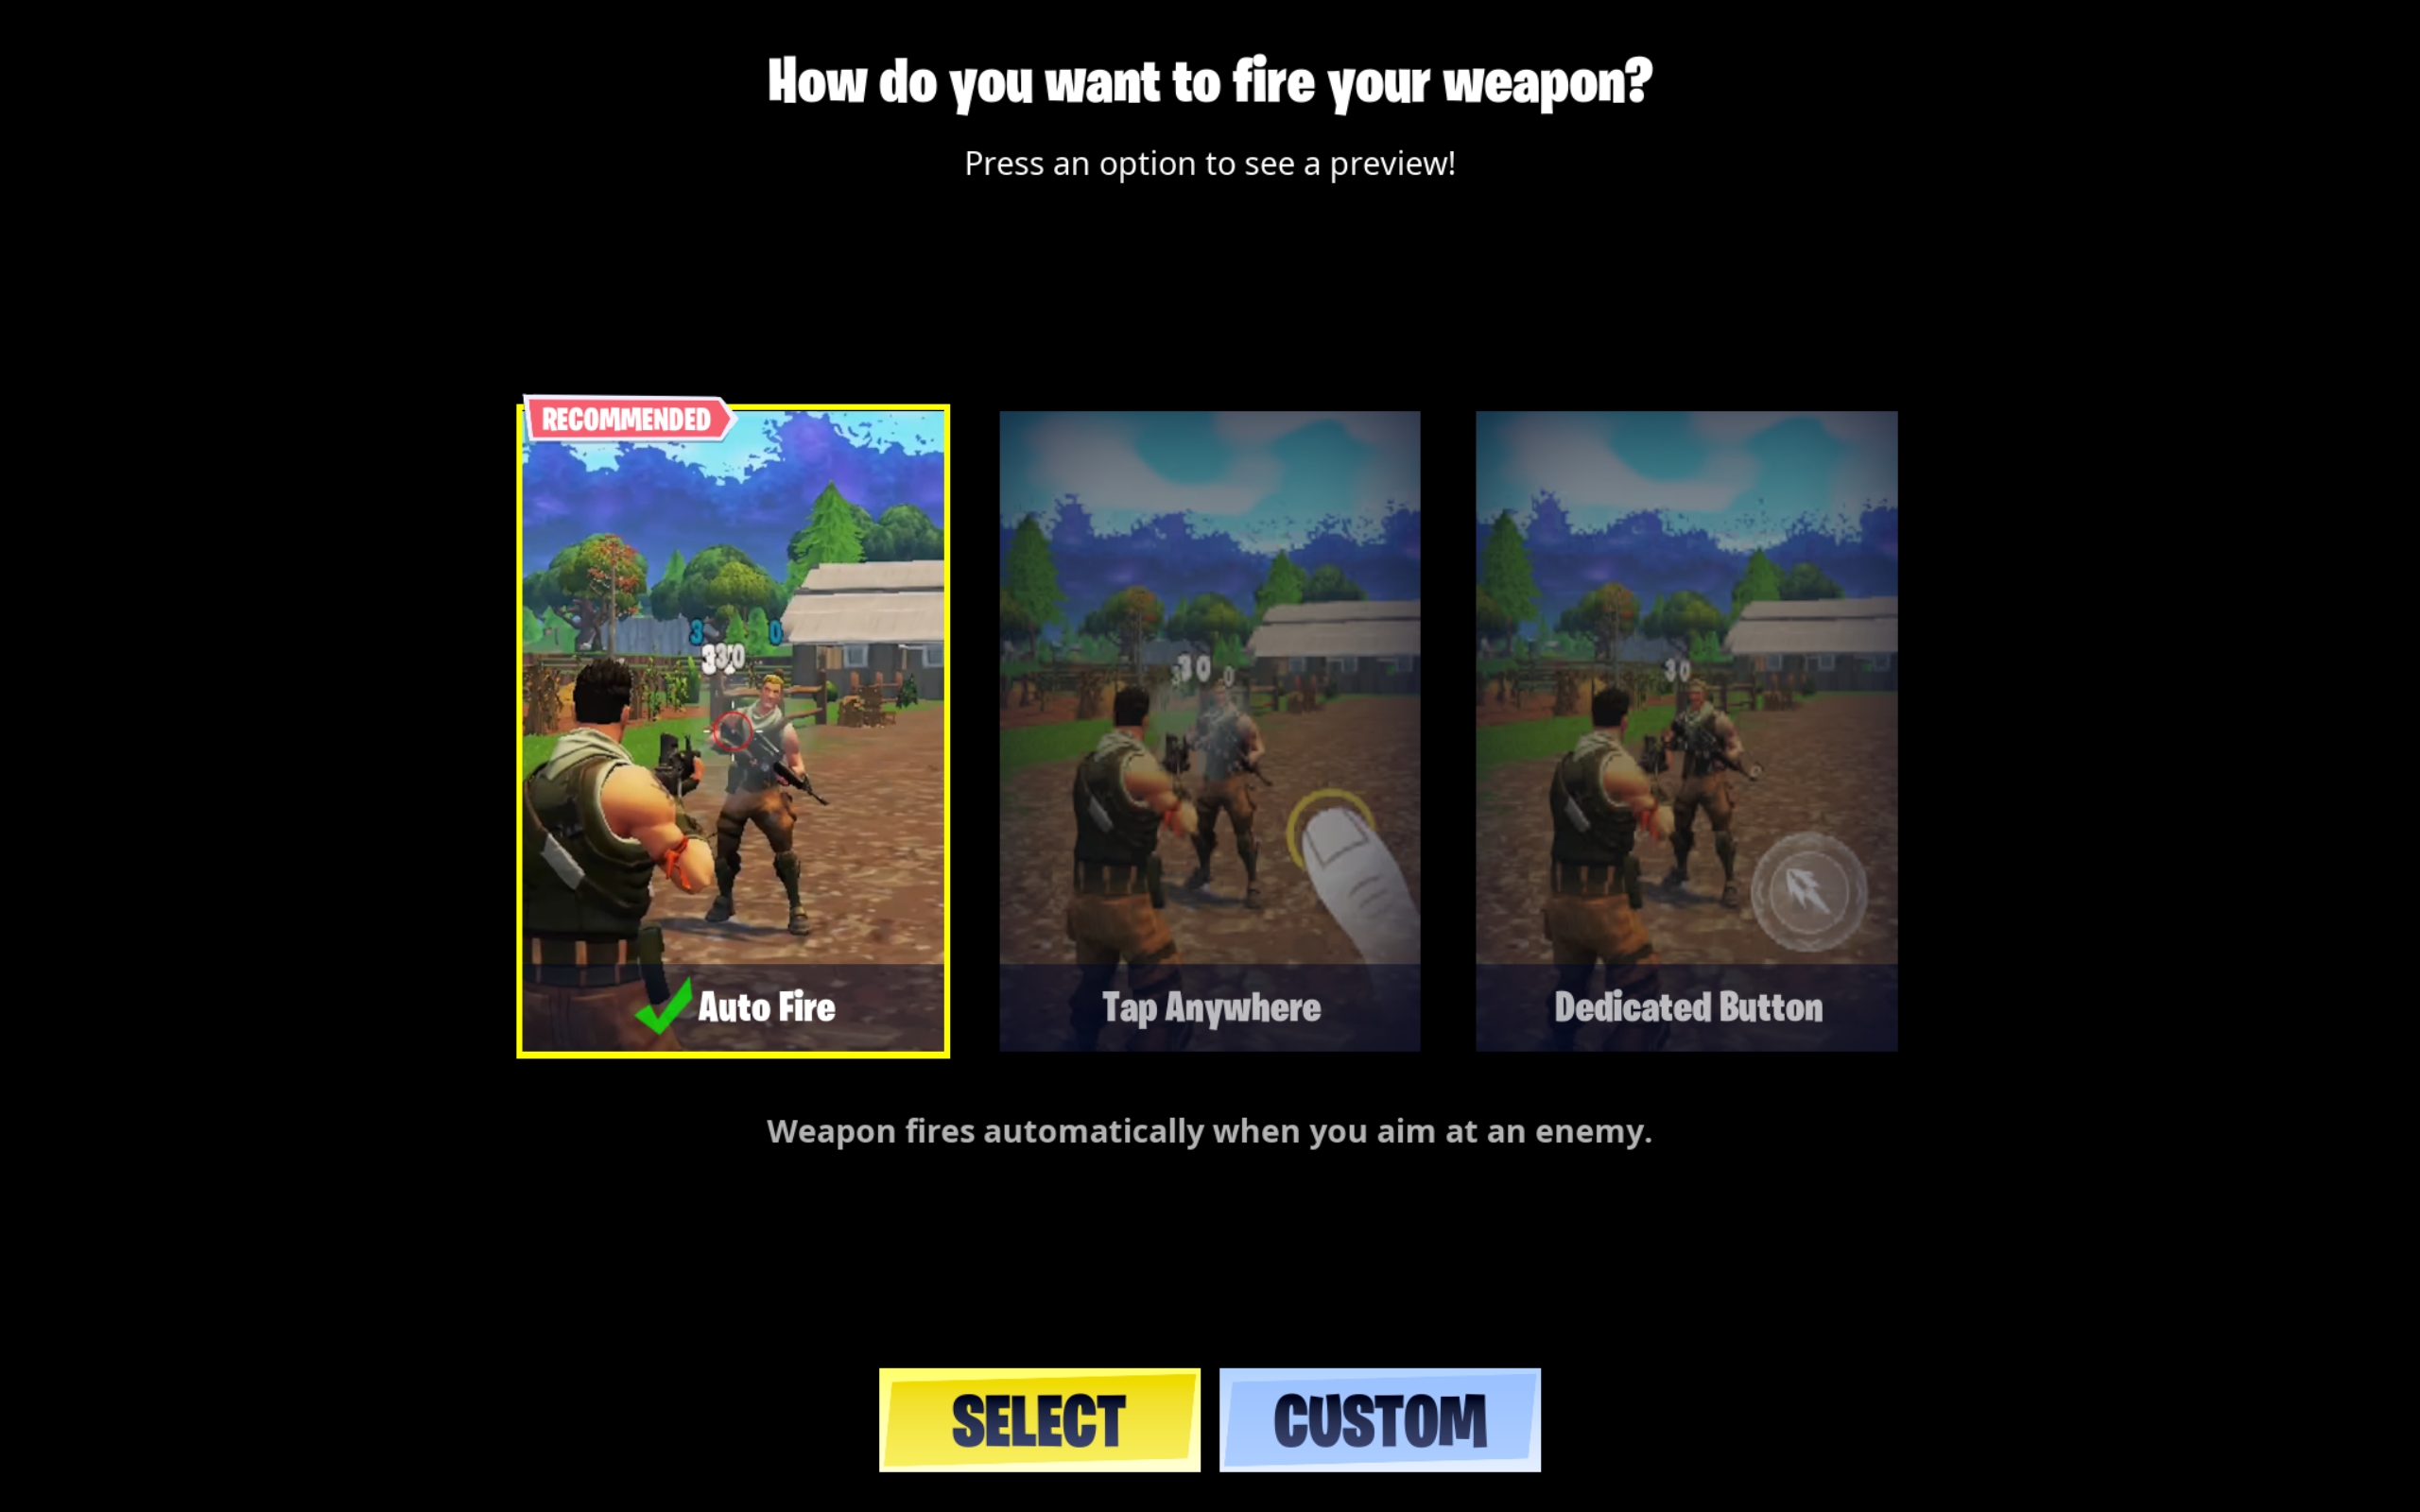 Fortnite on mobile screen shot of "How do you want to fire your weapon?" option screen. There are three options with accompanying images, auto fire, tap anywhere, and dedicated button. Auto fire is checked off.